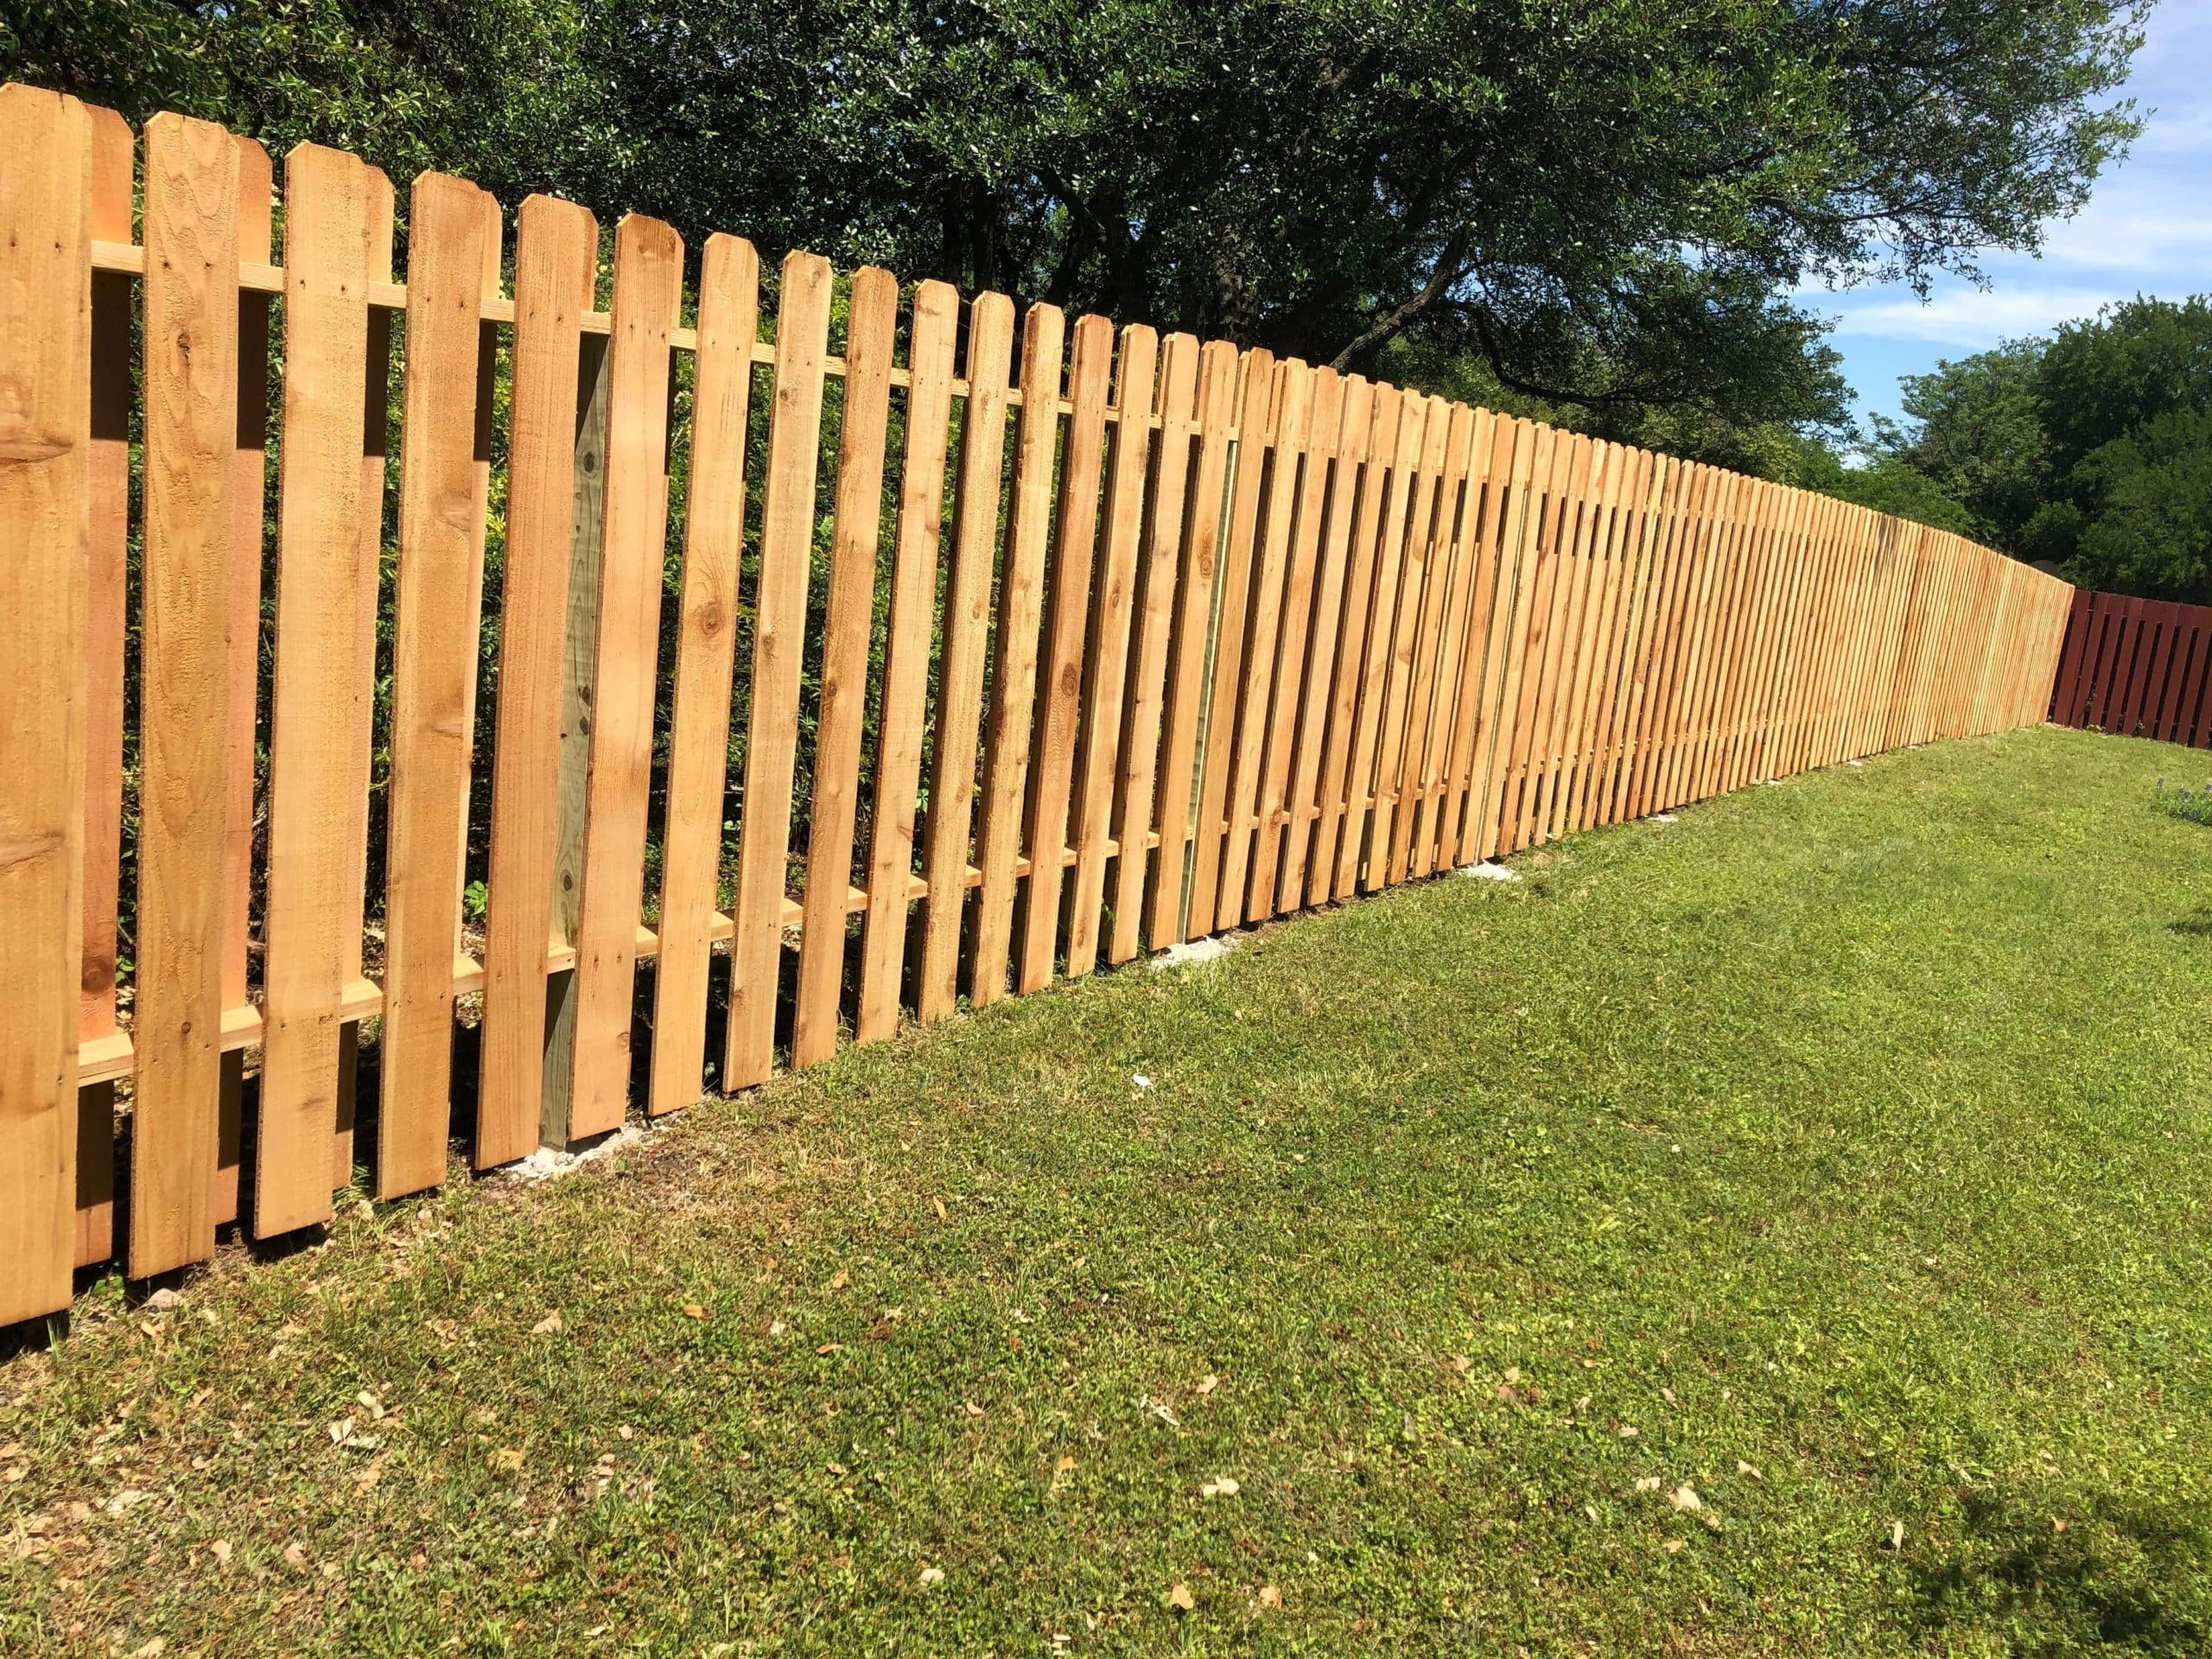 Shadowbox wood fence with pickets in an Austin backyard